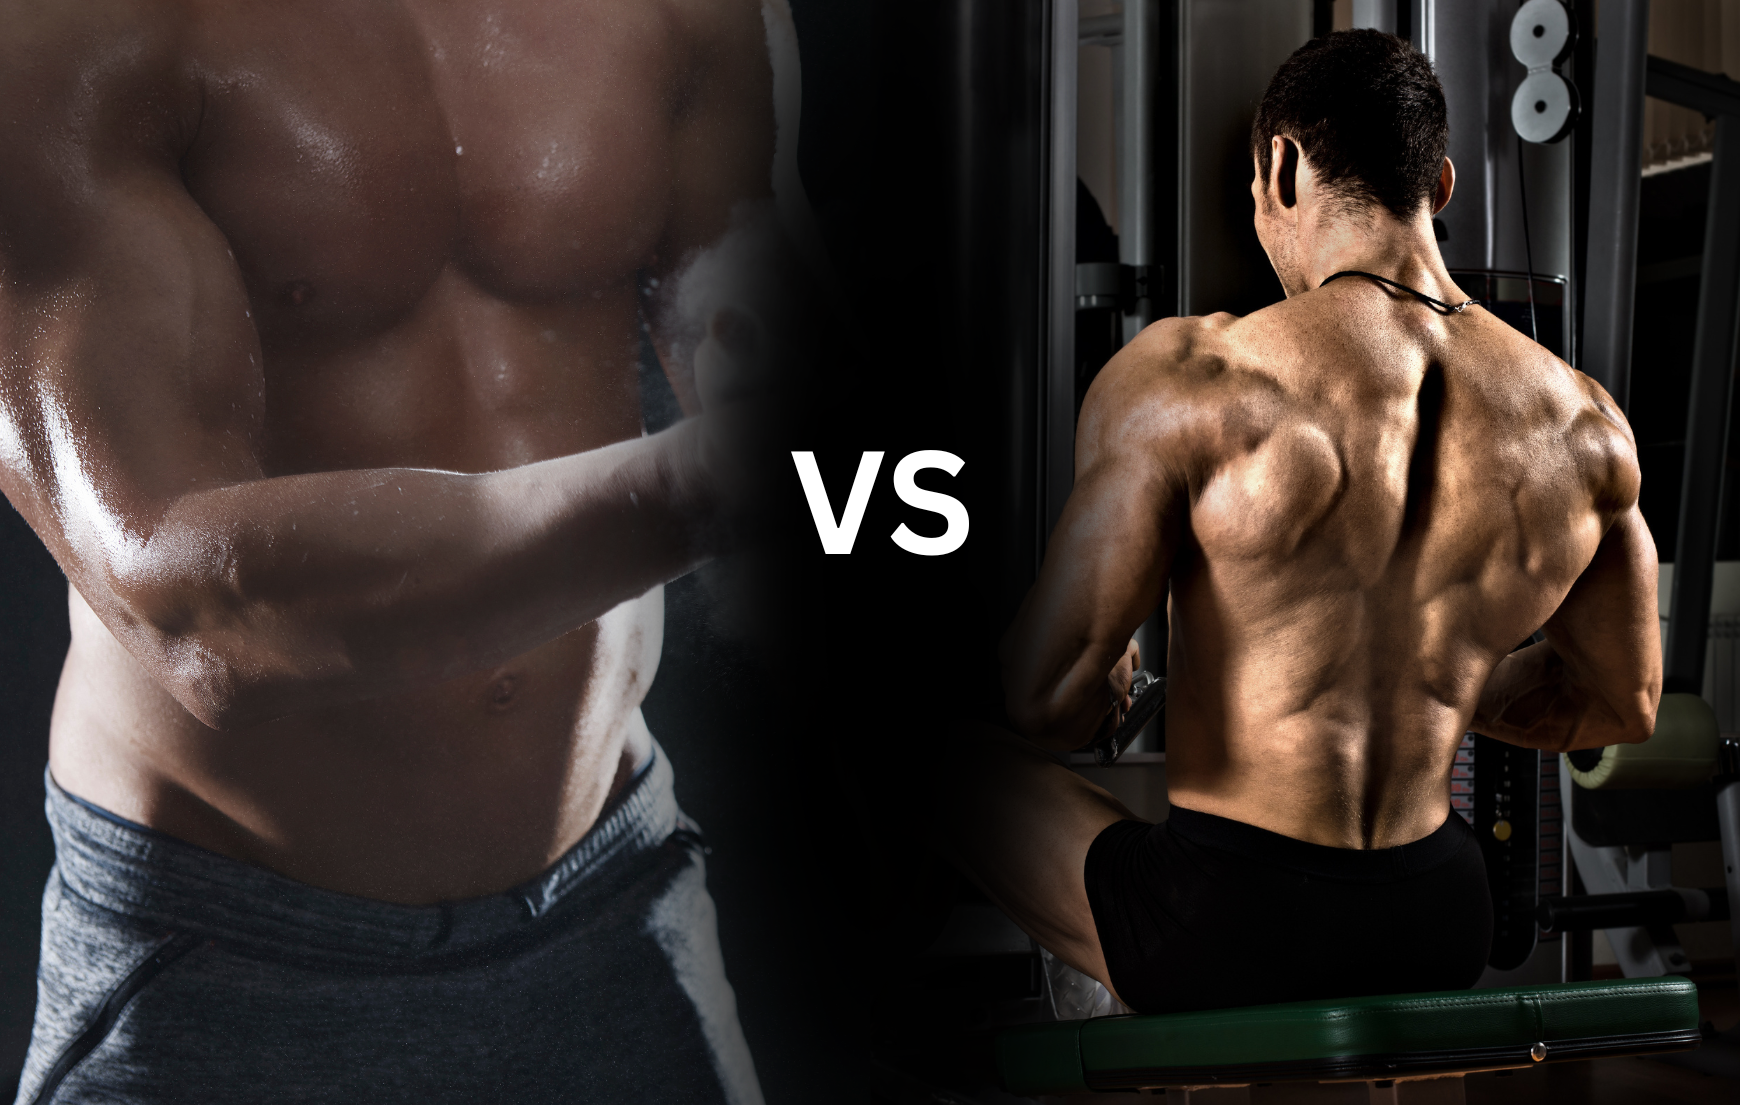 CrossFit vs Bodybuilding: Which Builds More Muscle?